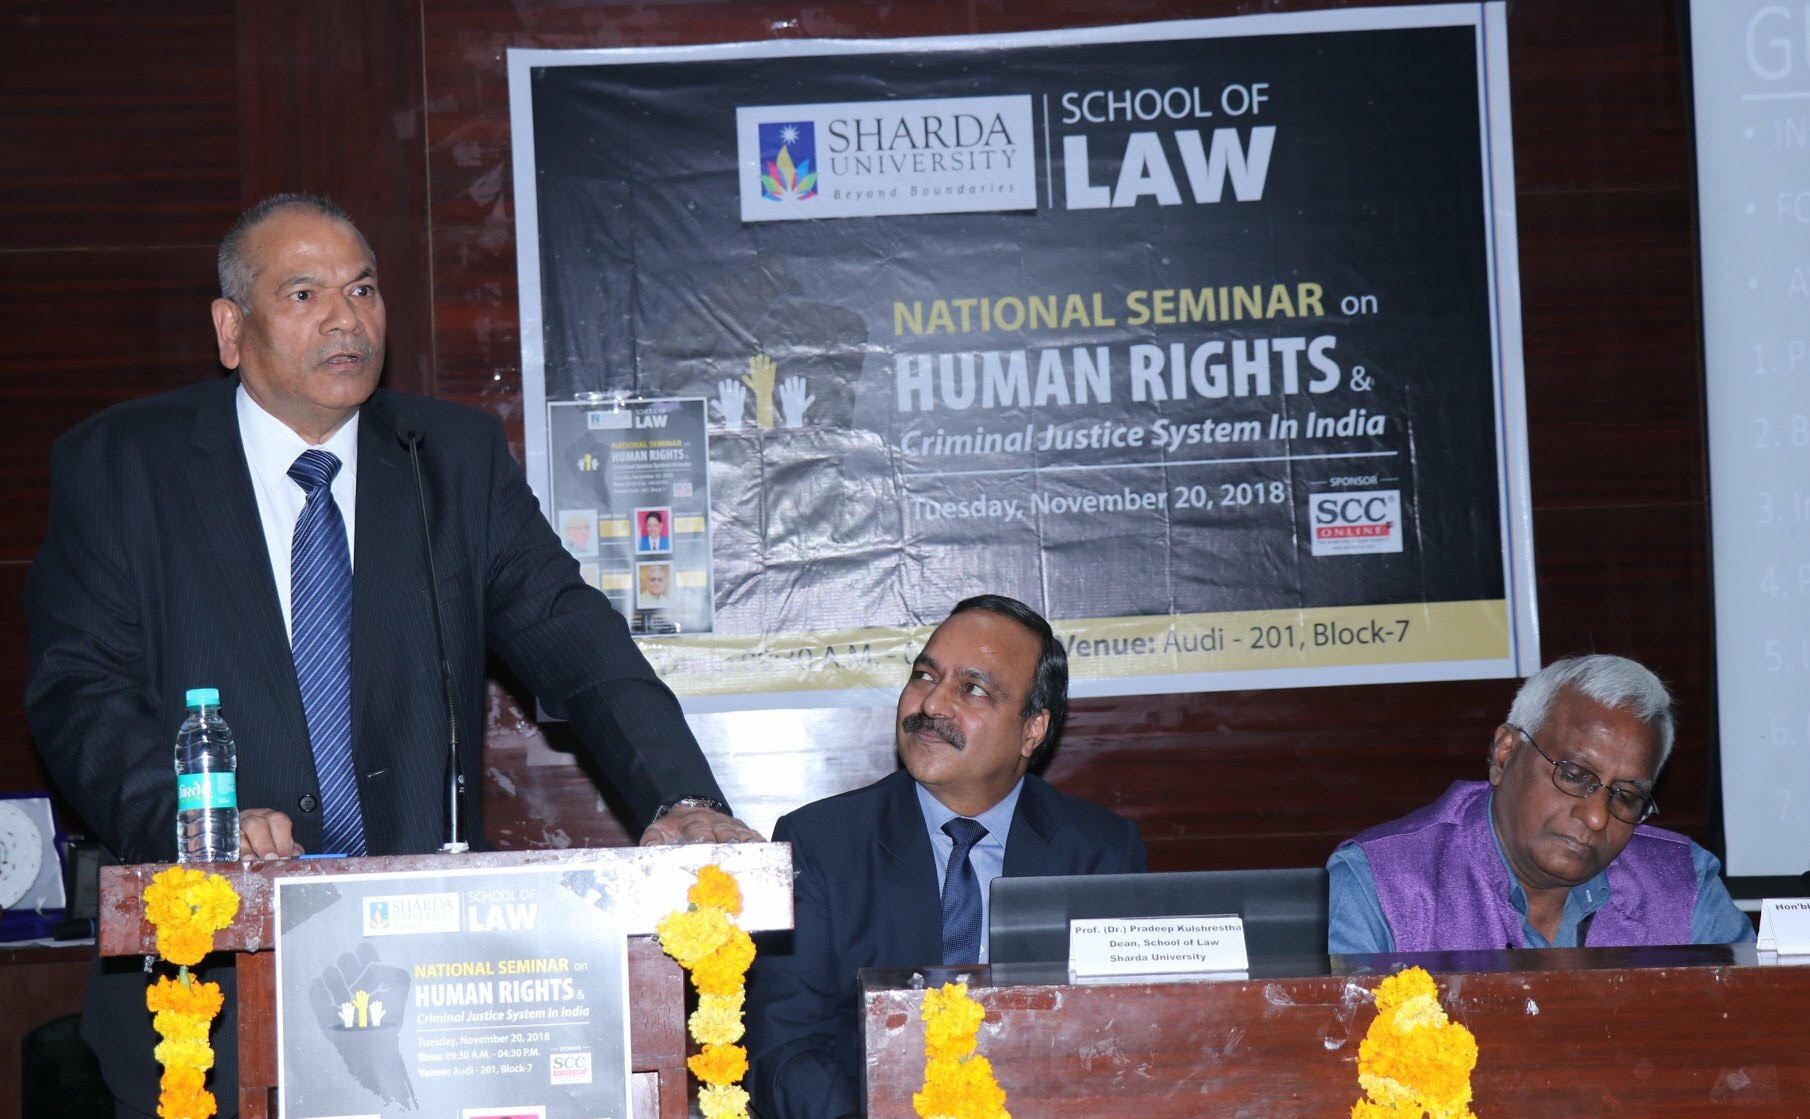 National Seminar on Human Rights and Criminal Justice System in India